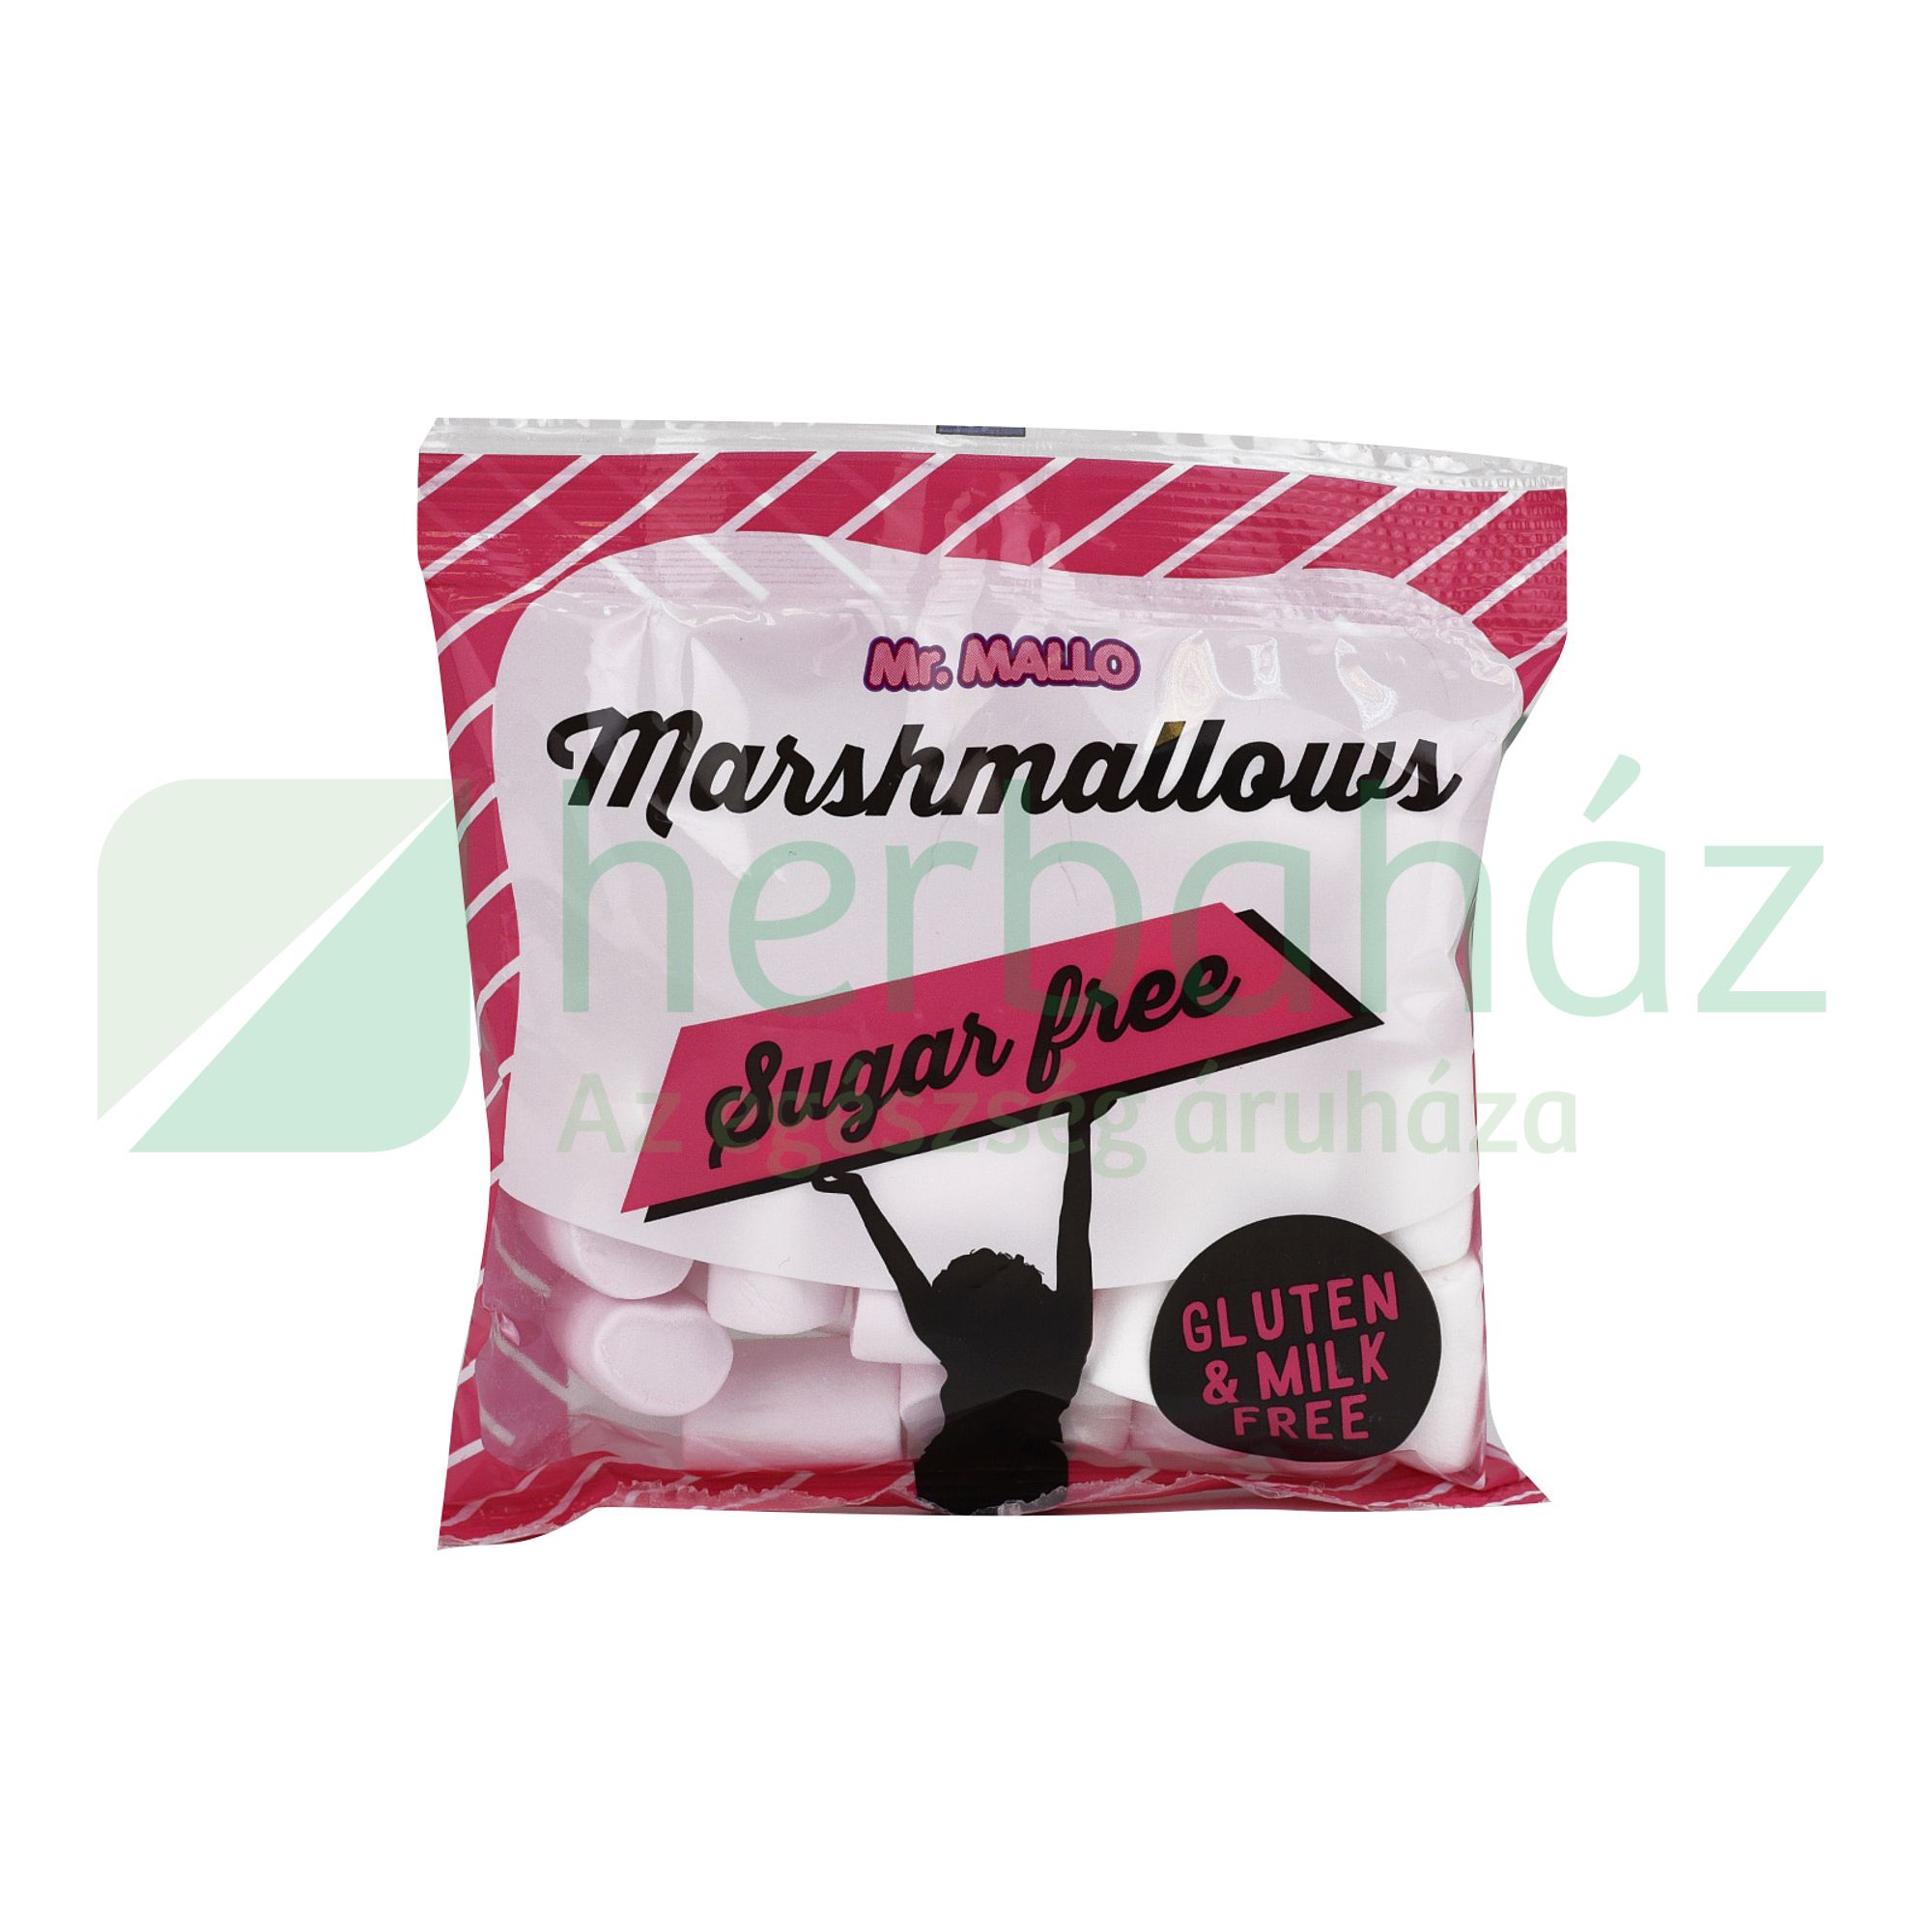 MELLOW PARTY HABCUKOR CUKORMENTES 75G